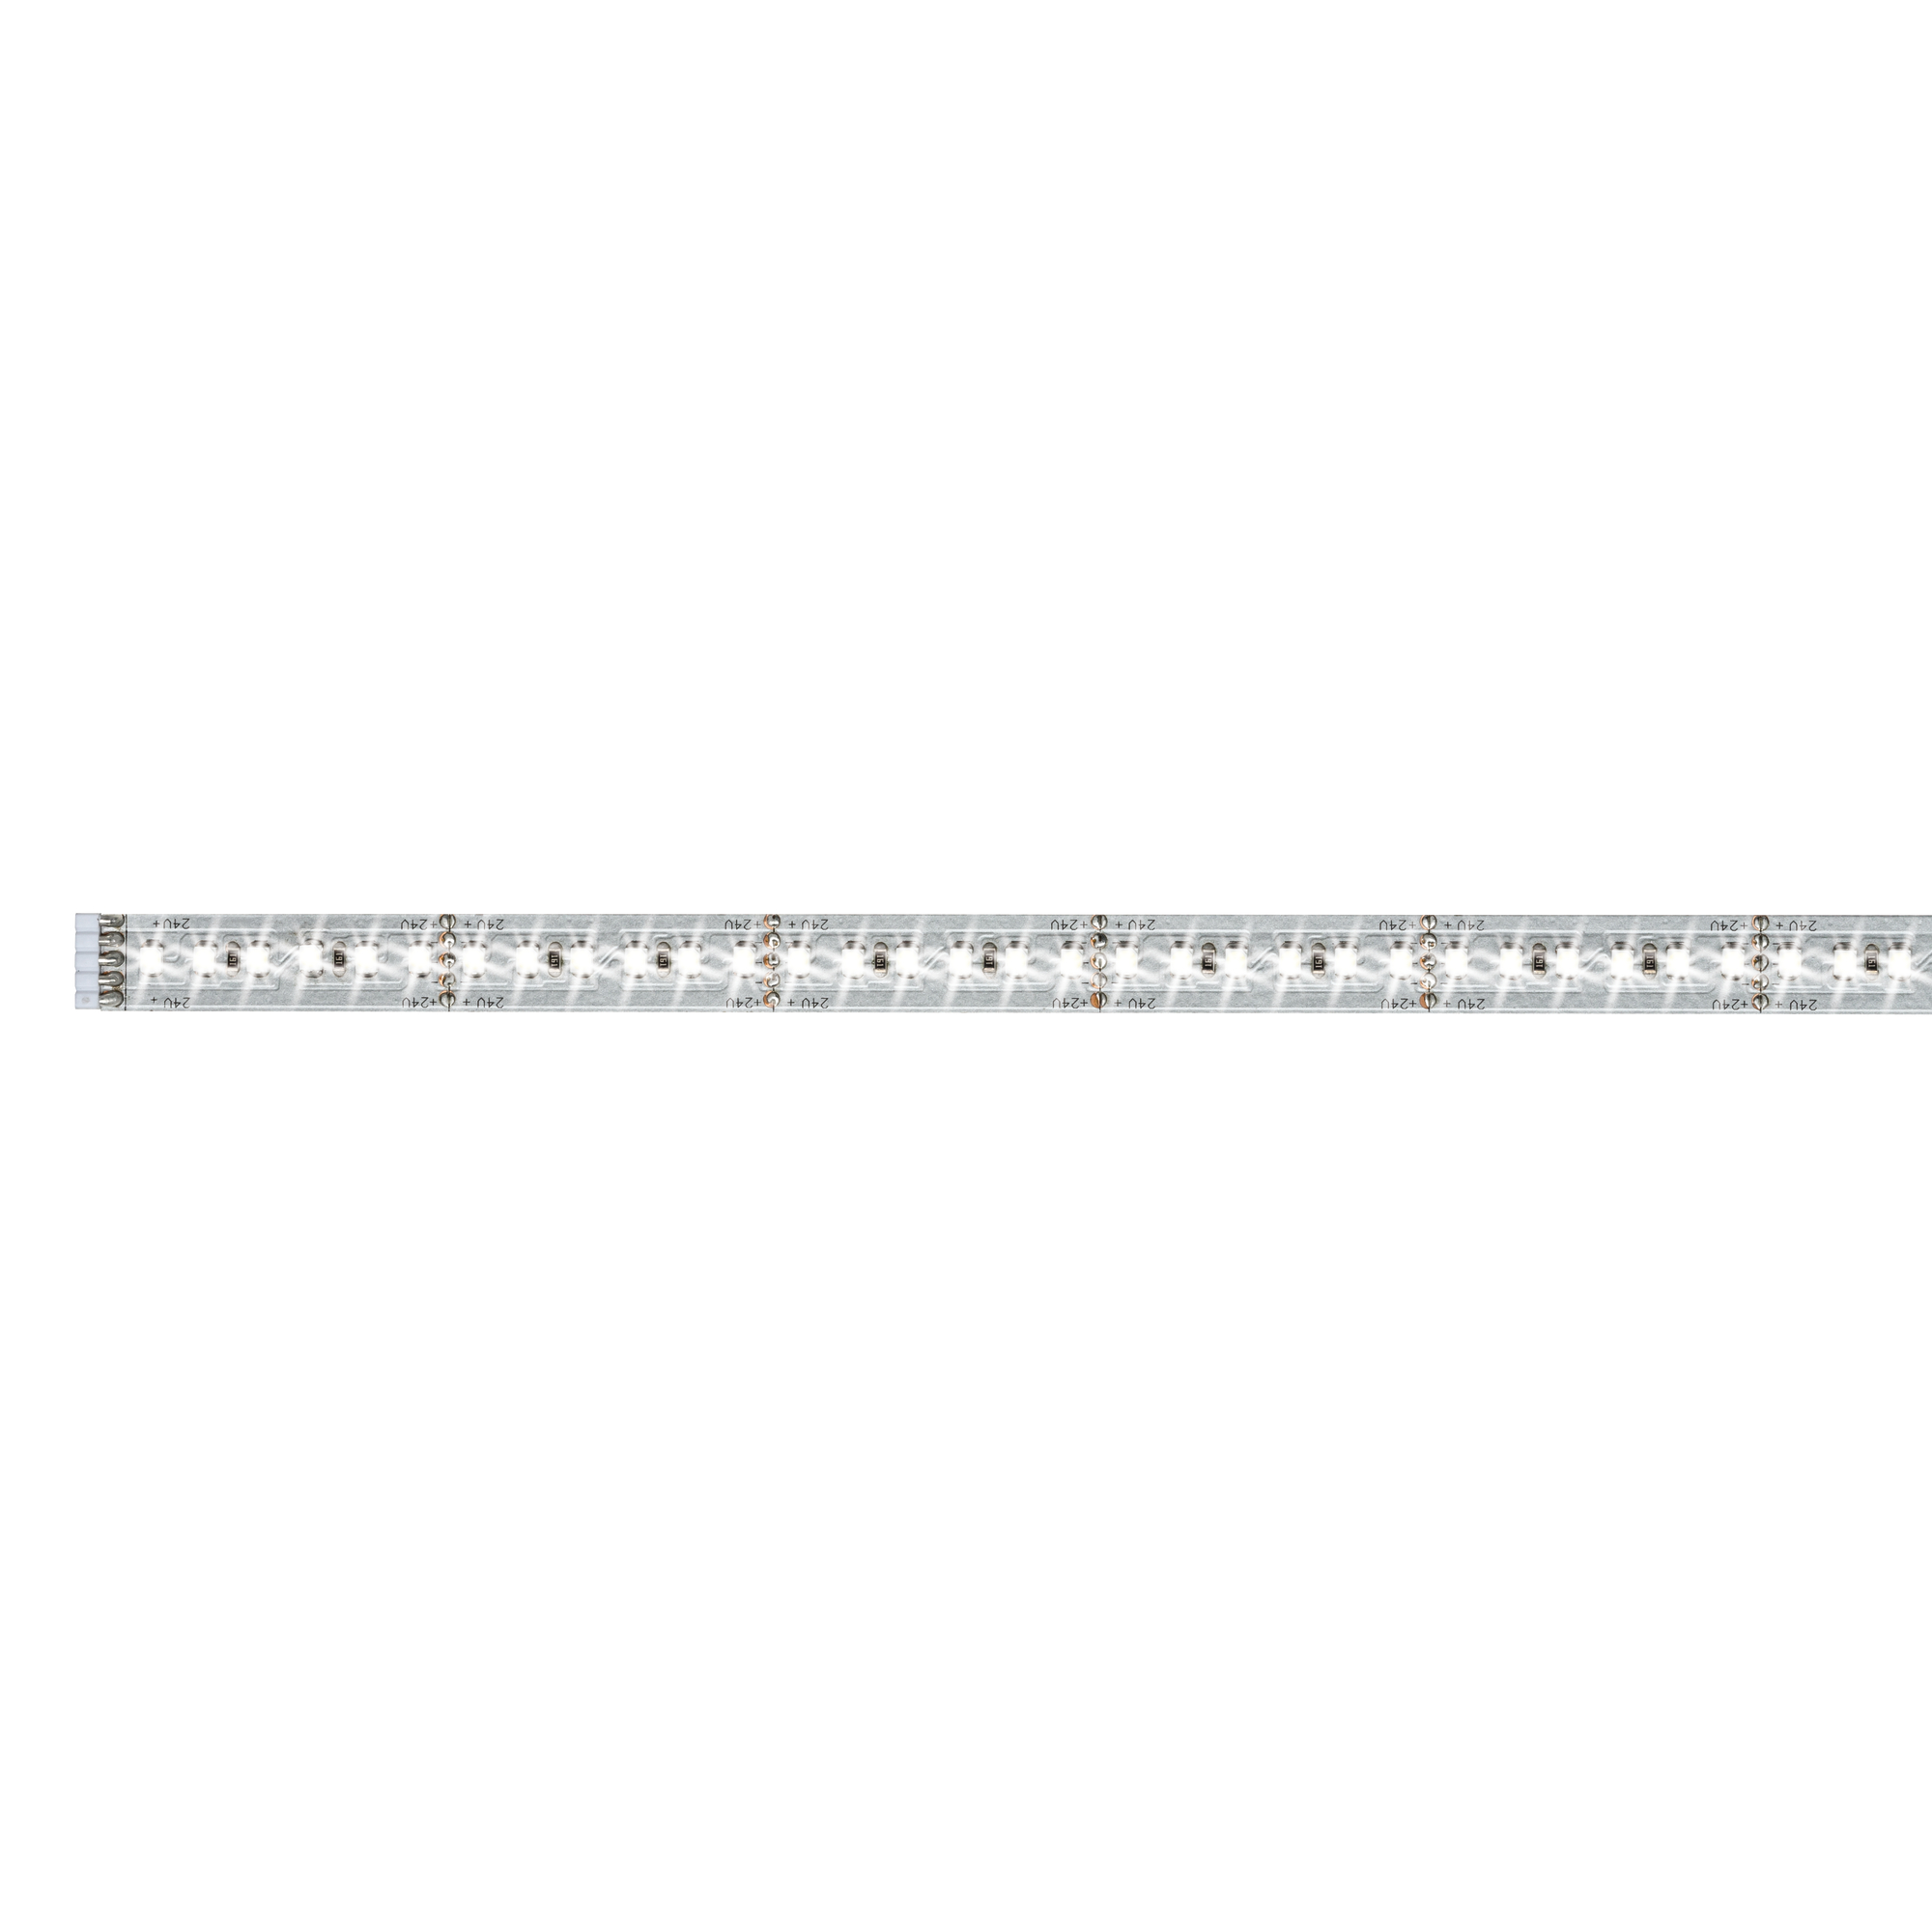 Function MaxLED 1000 Strip 50 cm Tageslichtweiß 6 W 24 V Silber + product picture